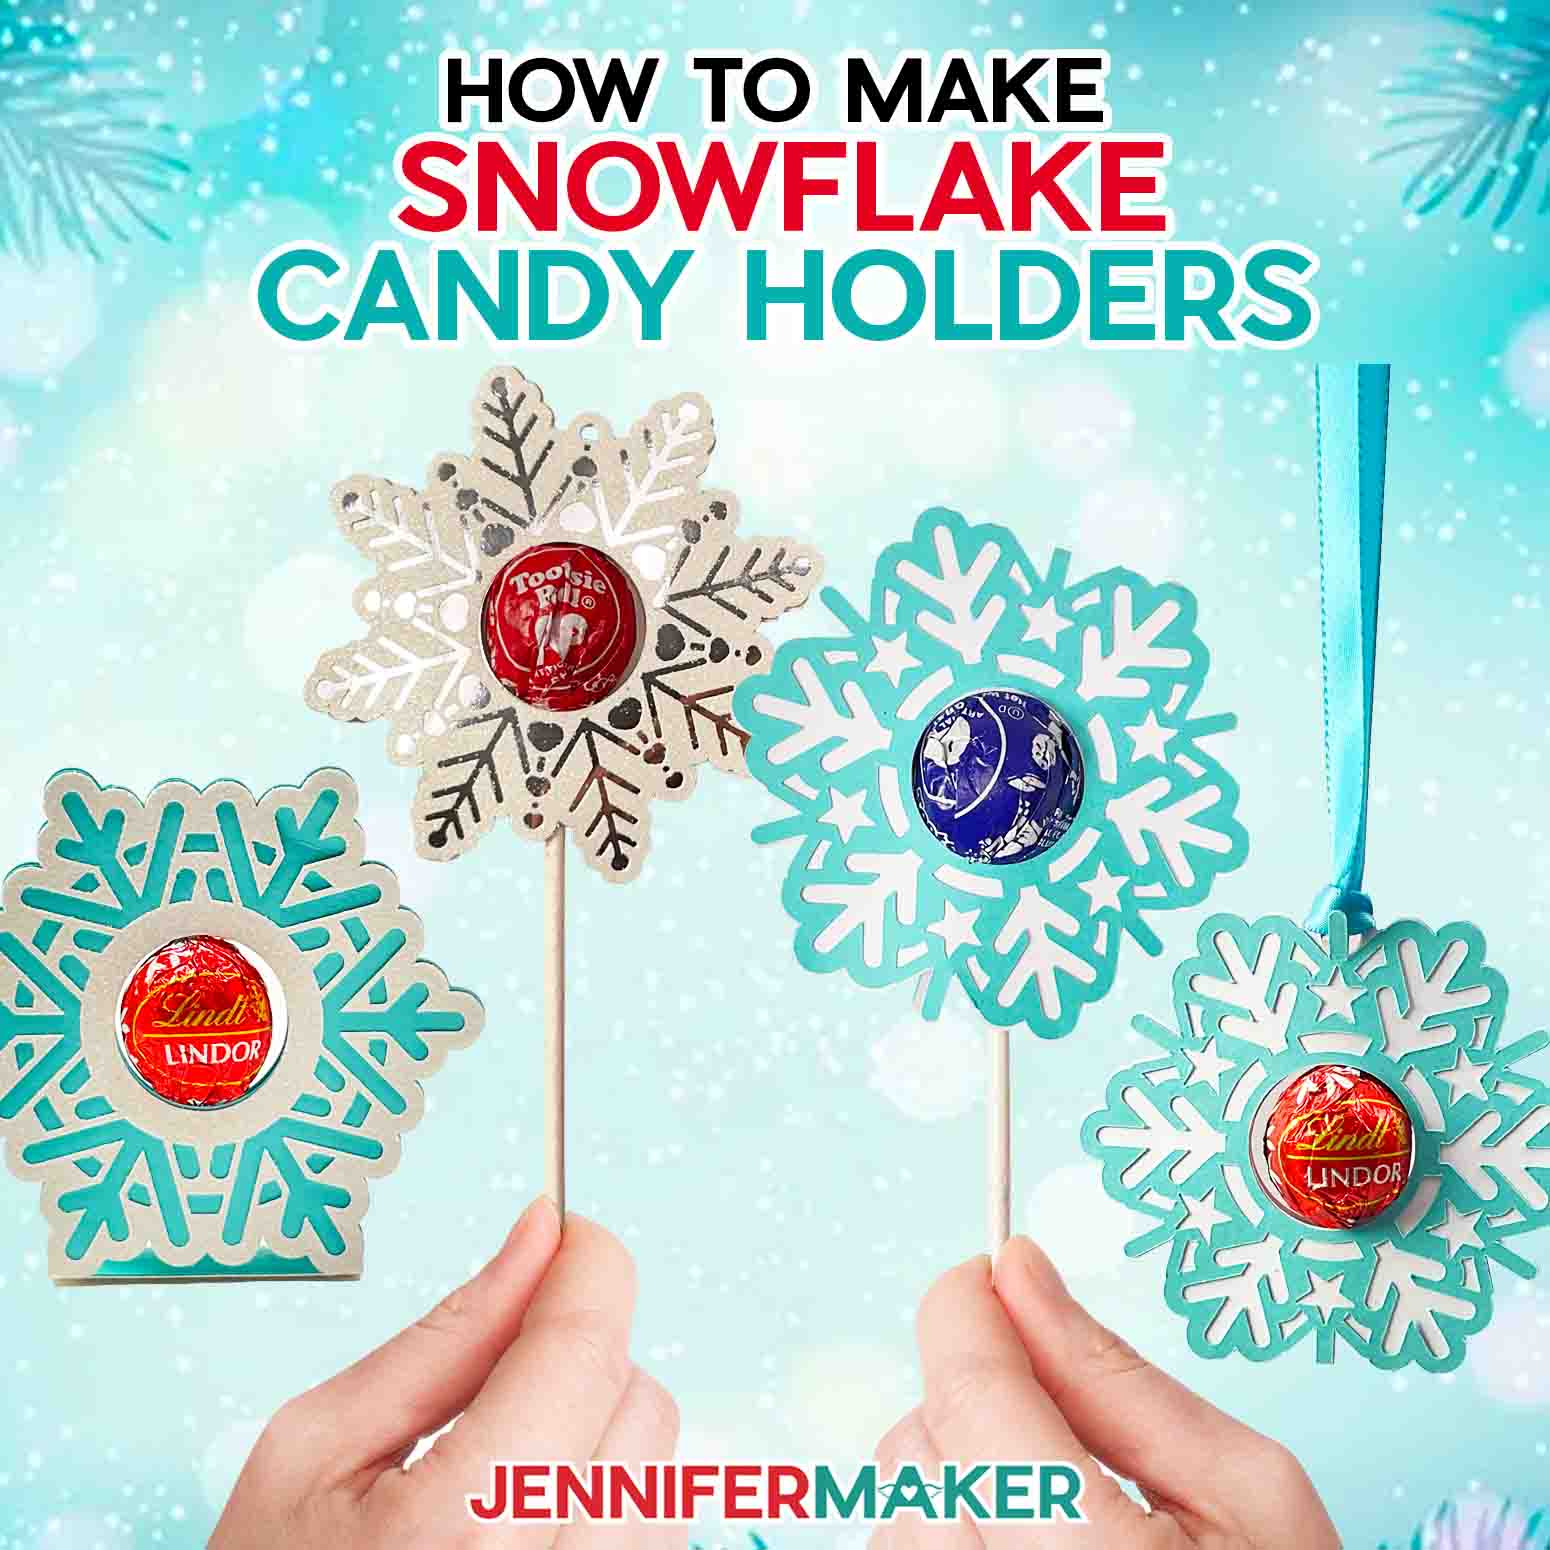 Learn how to make snowflake candy holder with JenniferMaker's new tutorial! Four snowflake candy holders, including two lollipops, one ornament, and one freestanding holder, all with wrapped candy in the center against a wintery blue background.